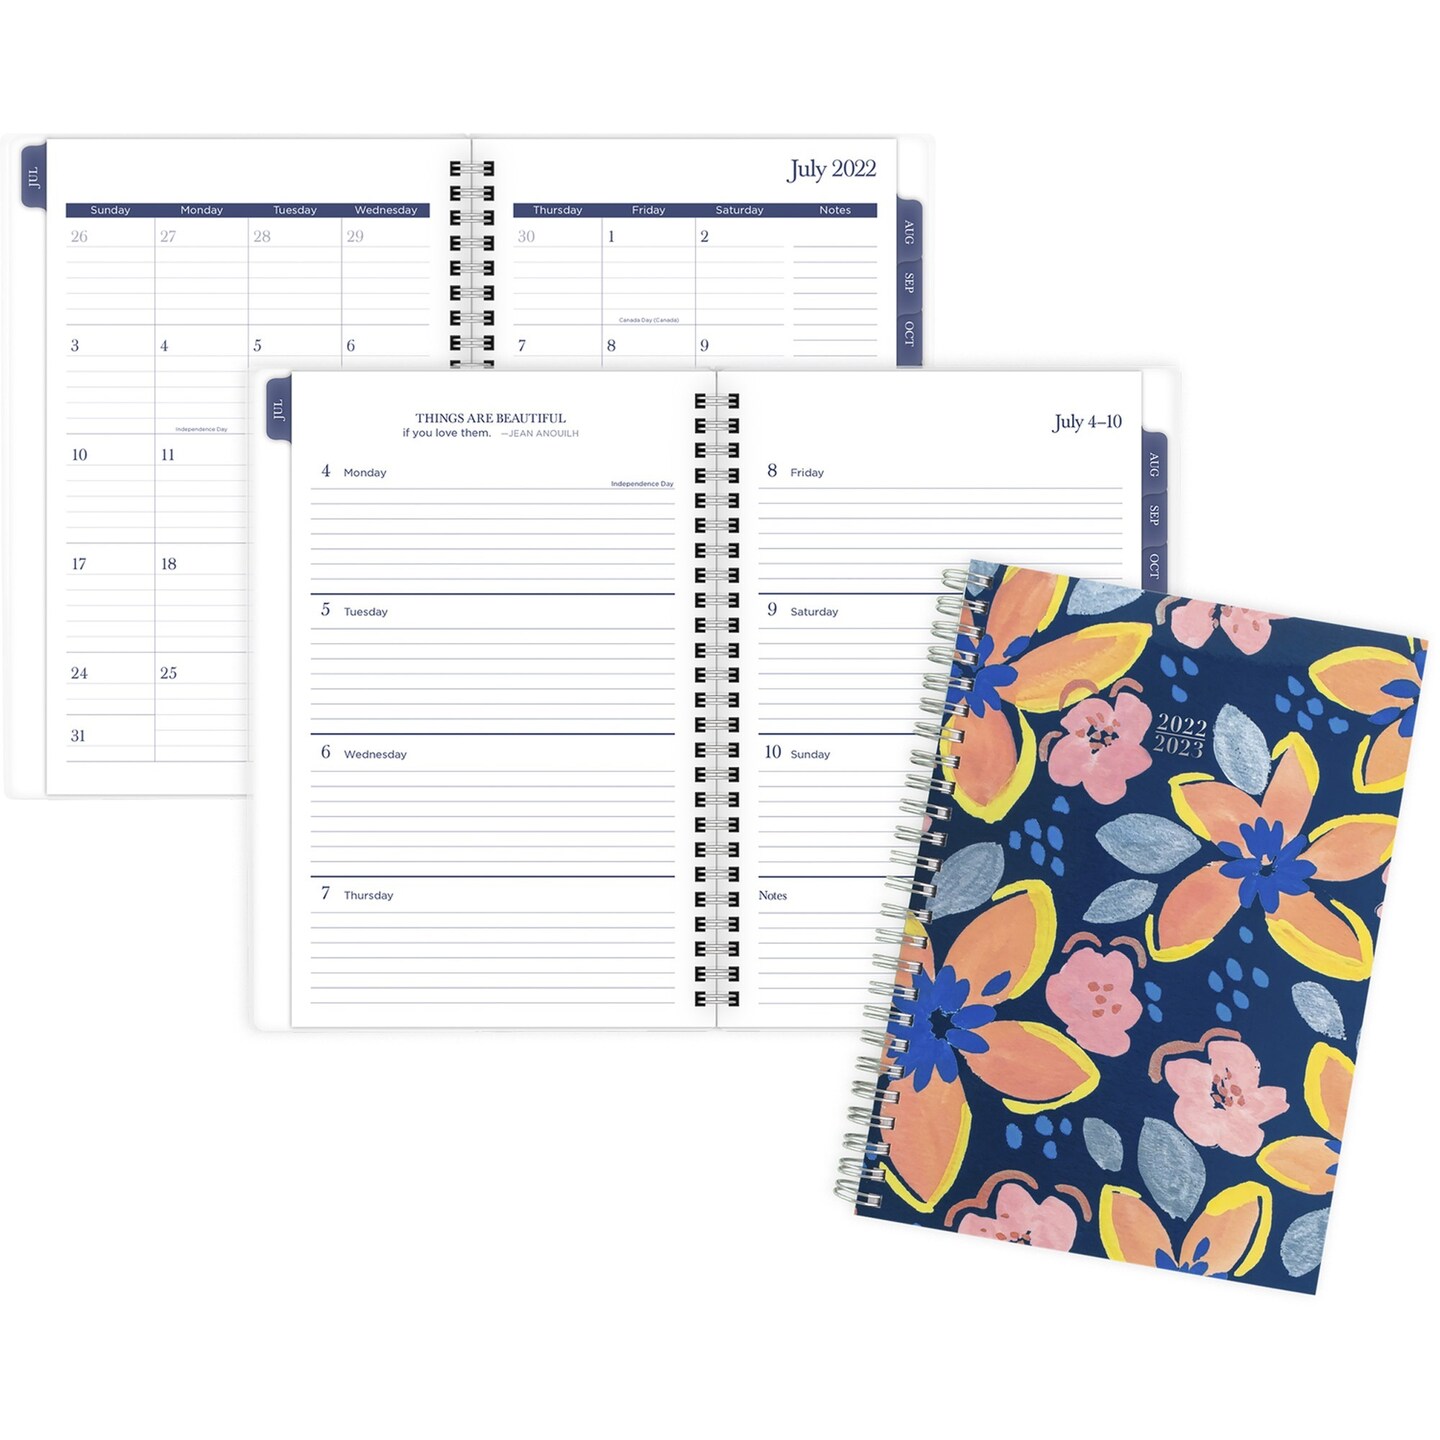 Cambridge Joyful Floral Planner - Small Size - Academic - Weekly, Monthly - 12 Month - July till June